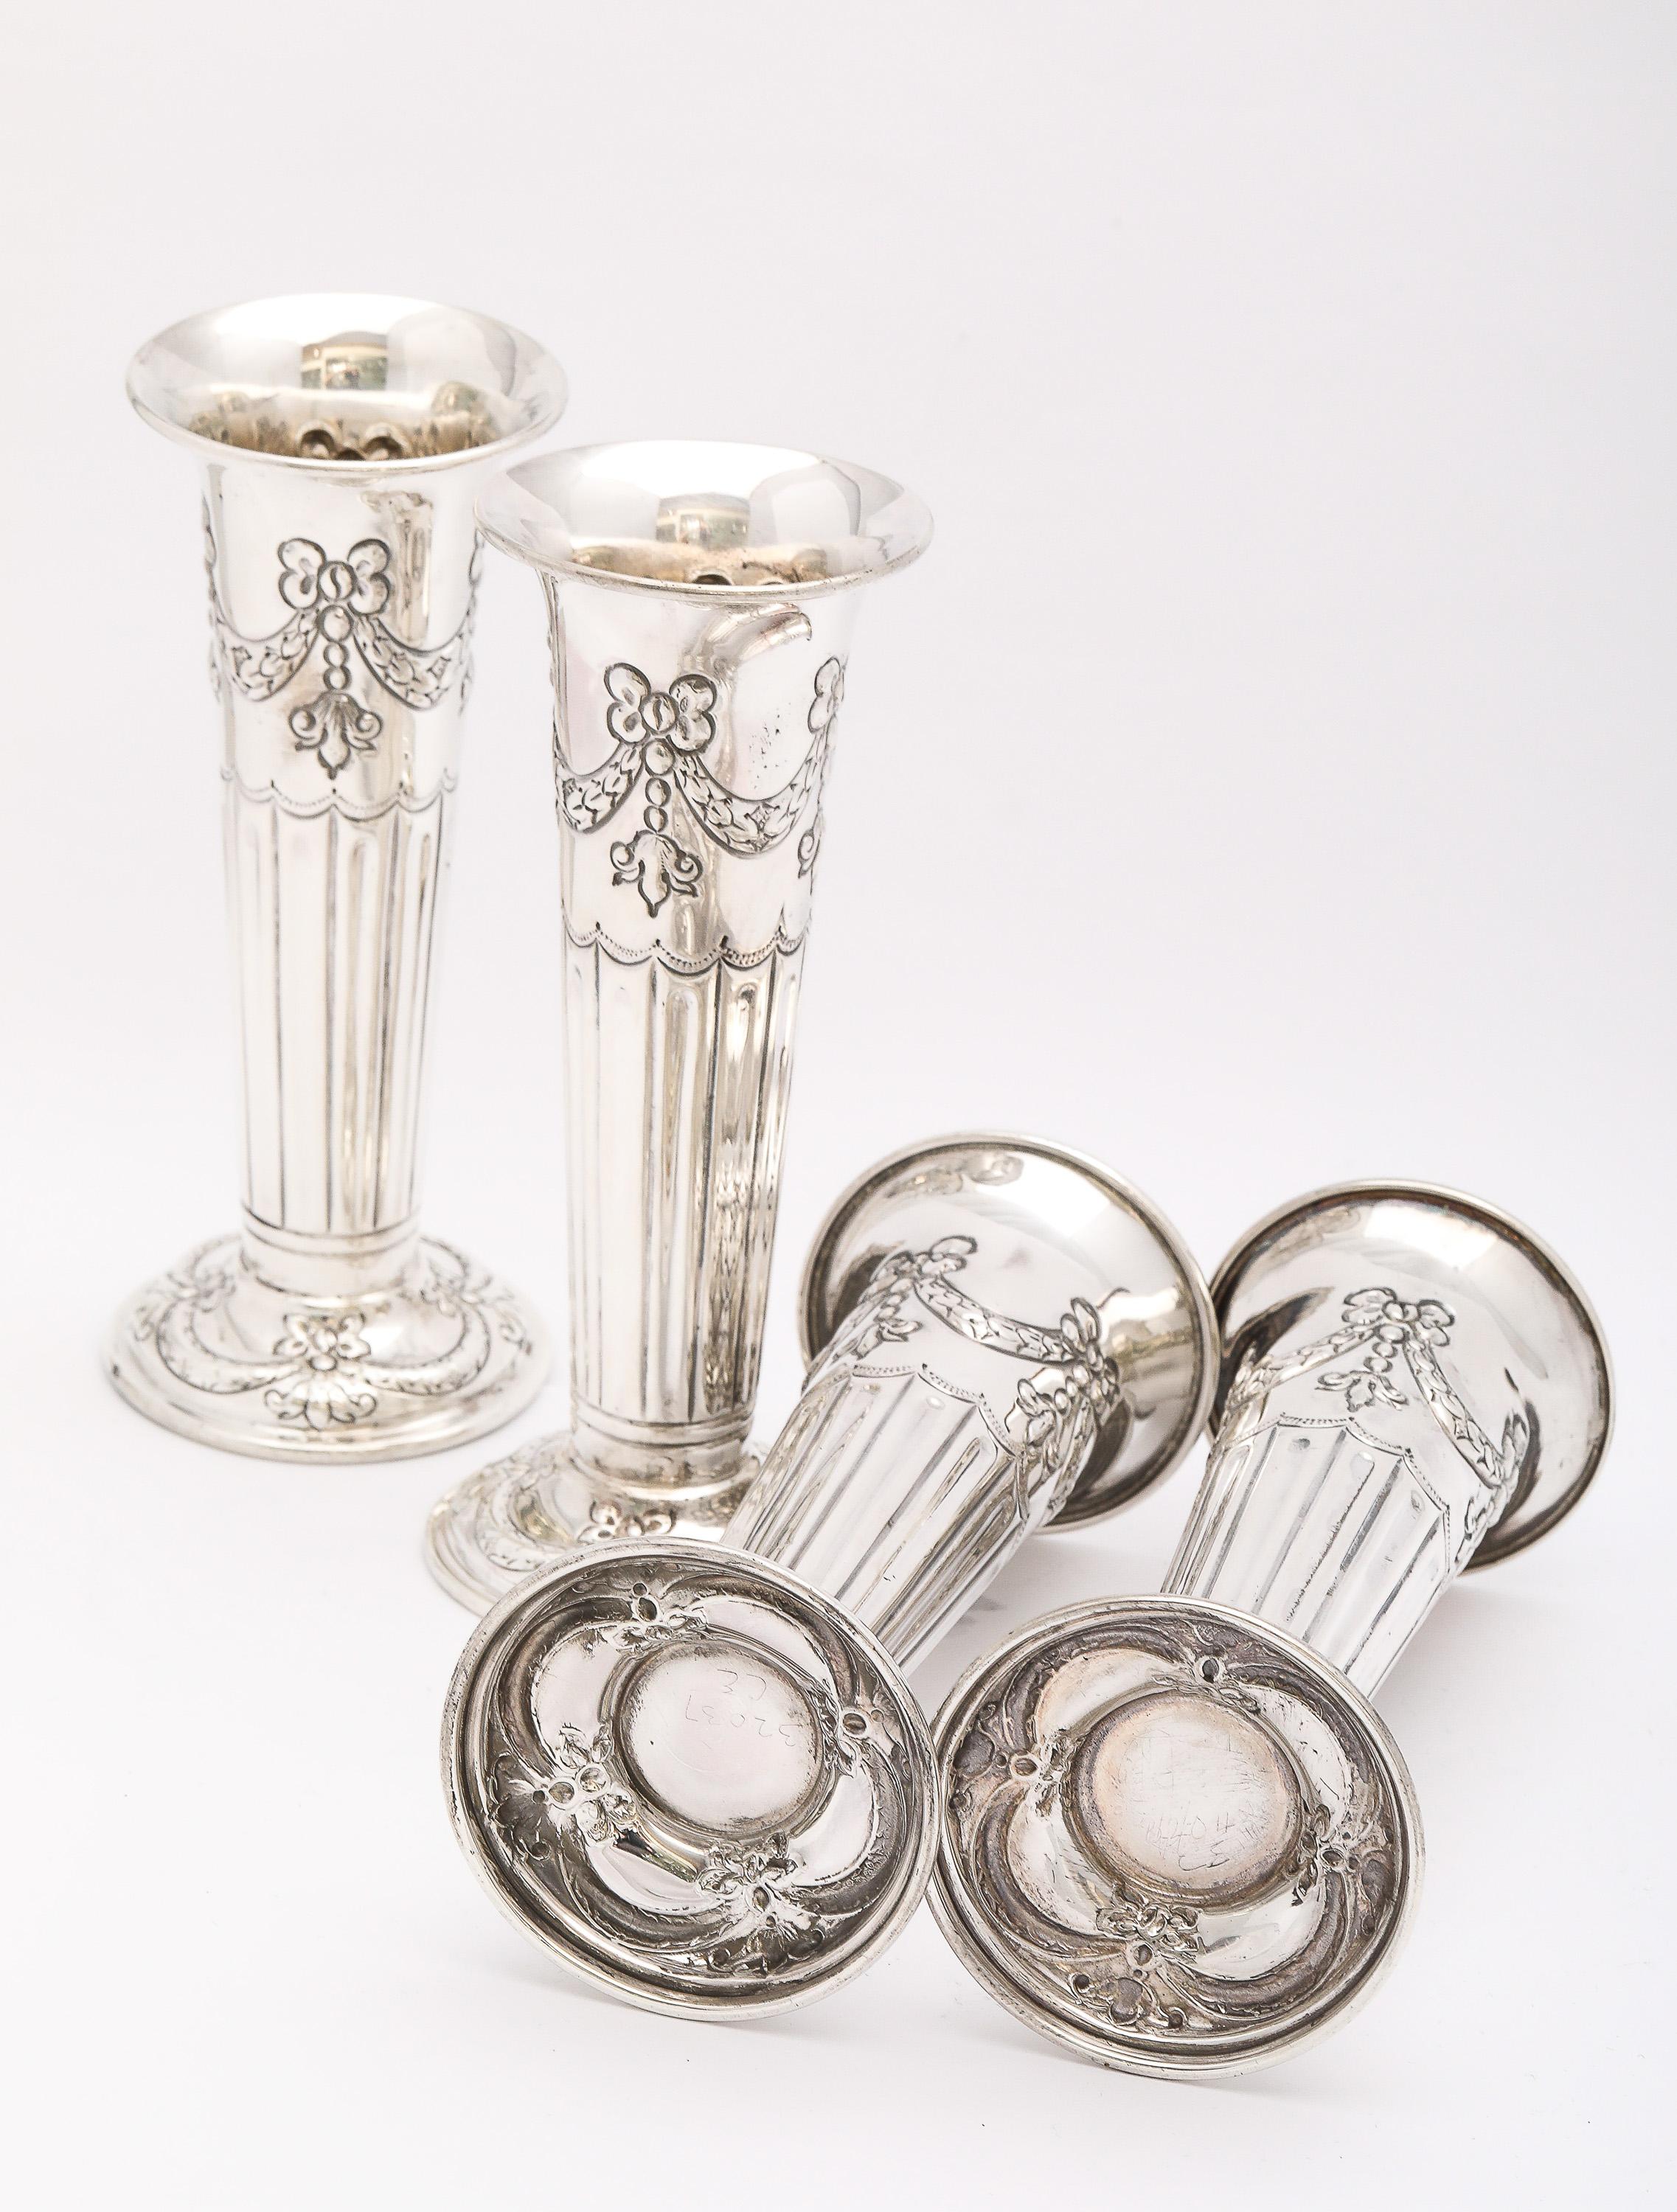 Rare Victorian Period Set of Four Matching Sterling Silver Bud Vases By Atkin For Sale 8